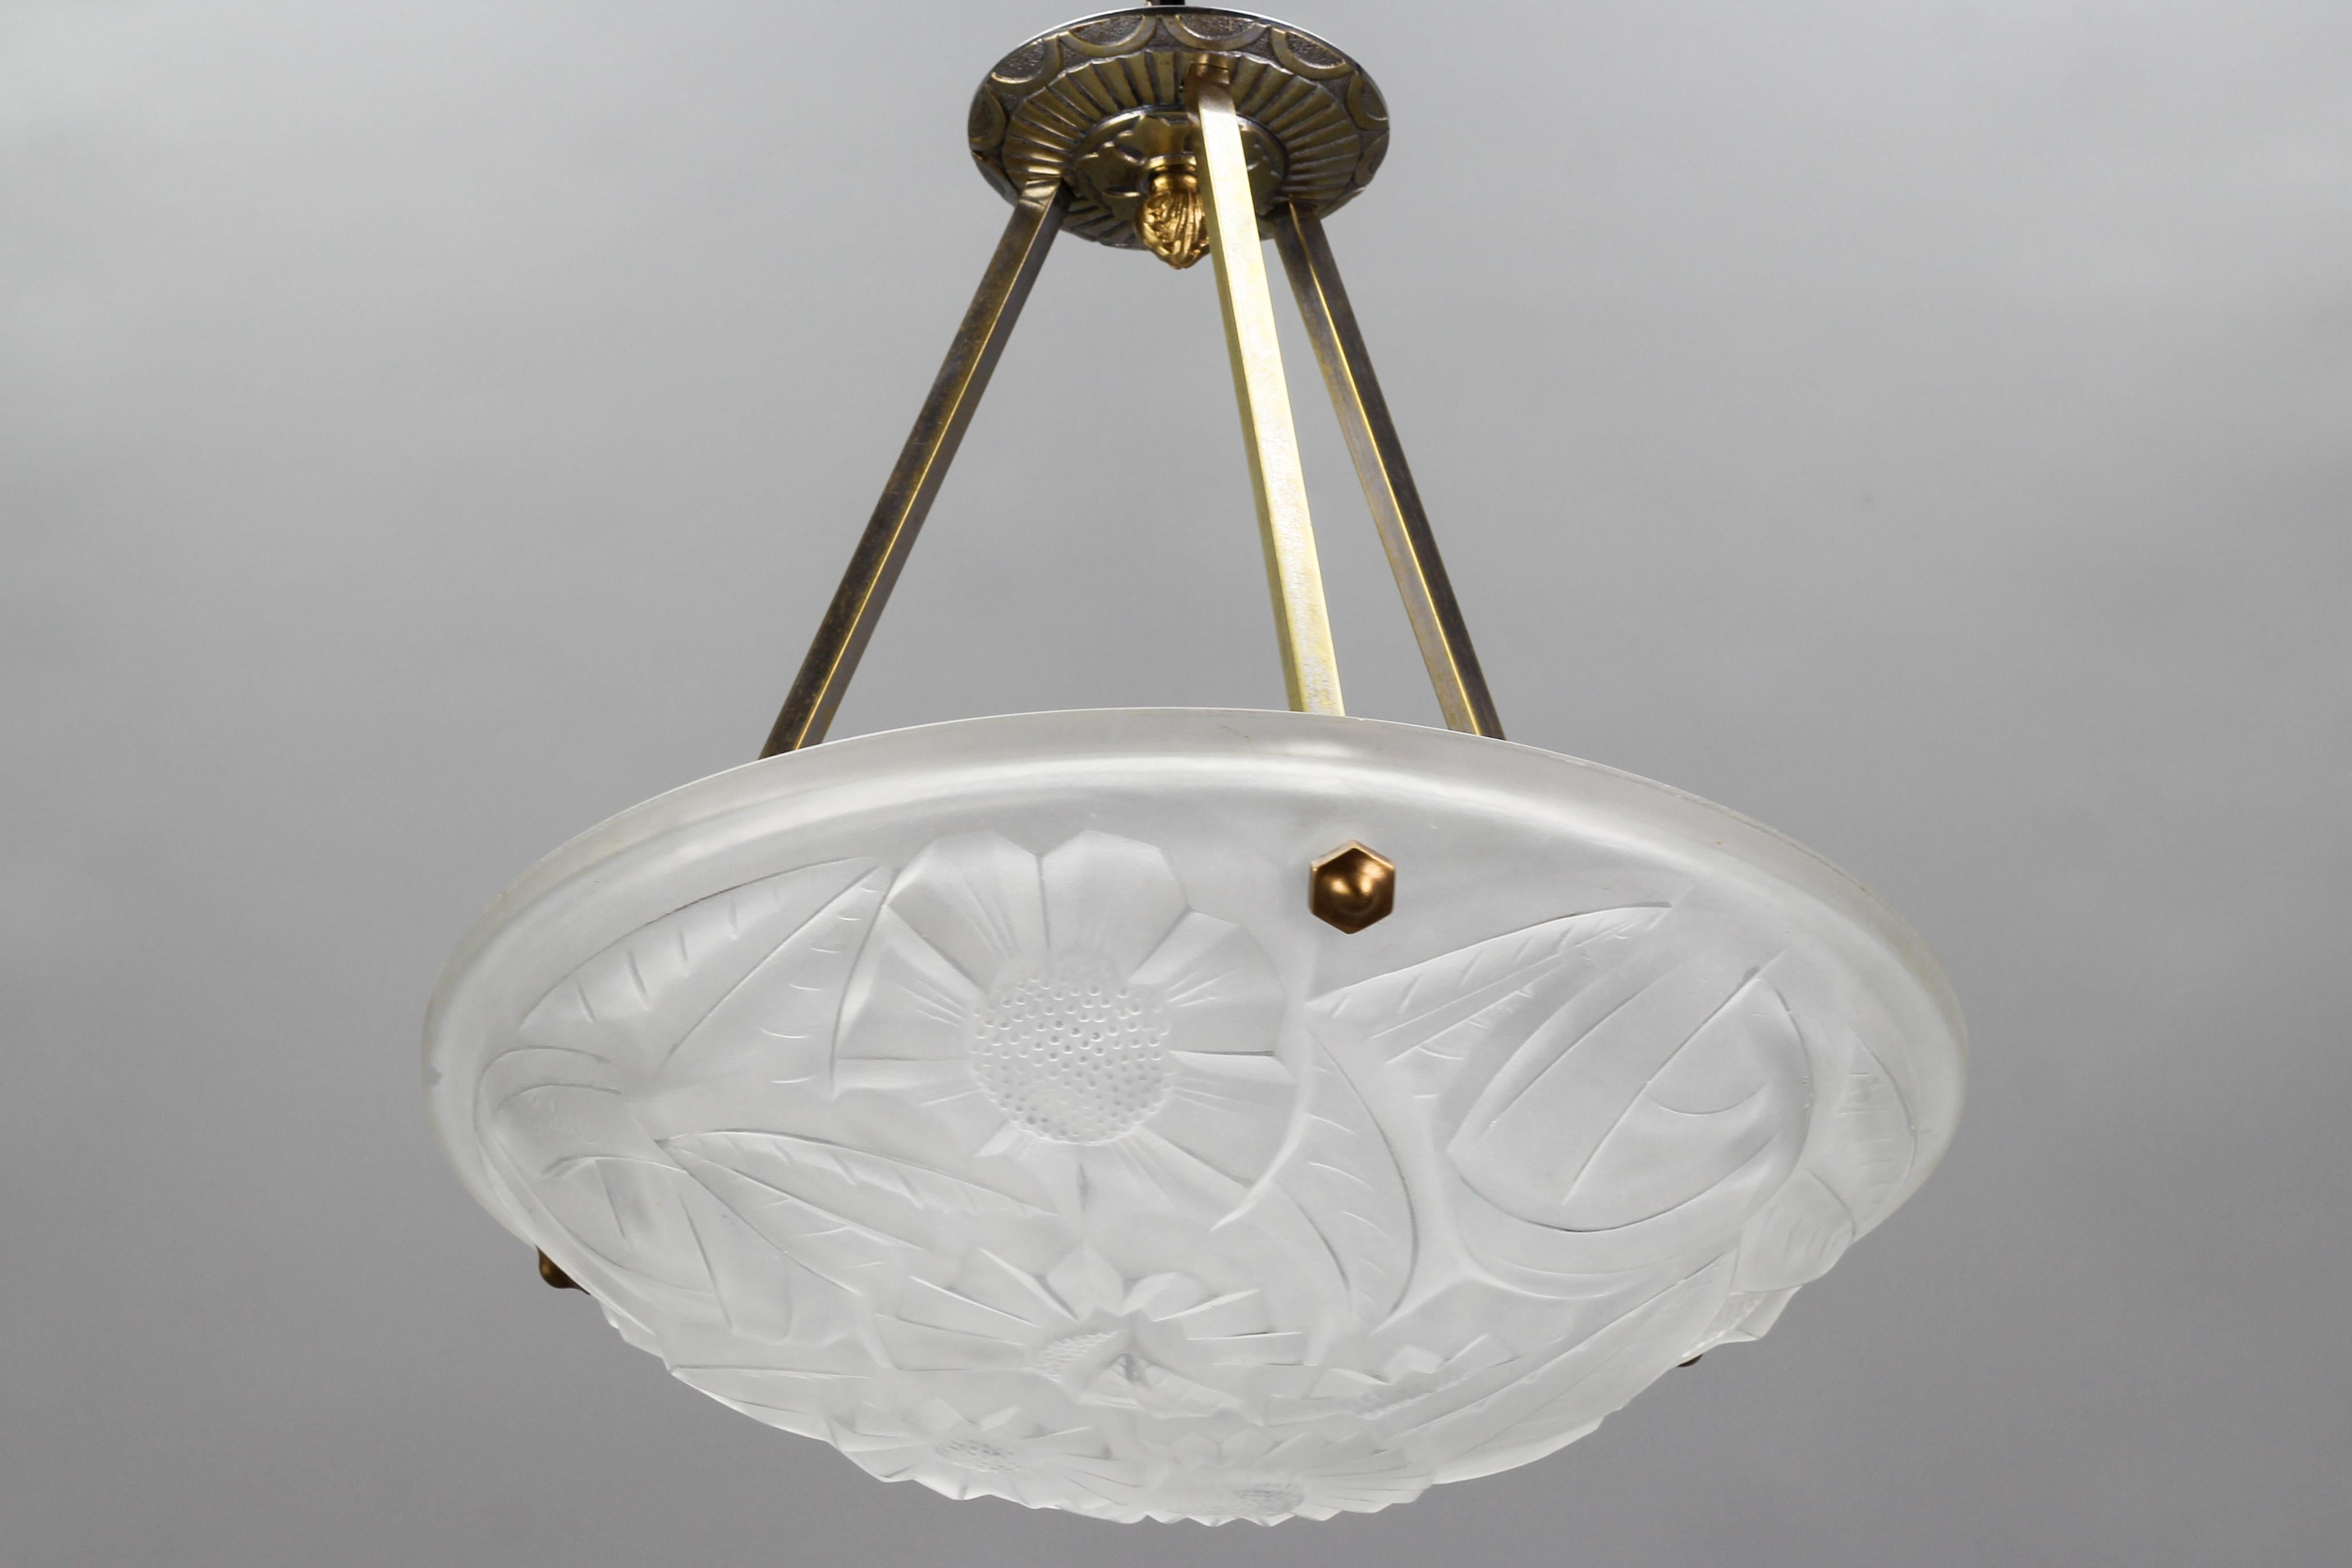 French Art Deco pendant chandelier with clear frosted glass shade signed Degué by Verrerie D'Art Degué. Beautifully shaped glass shade features stylized flower motifs, glass surface signed 